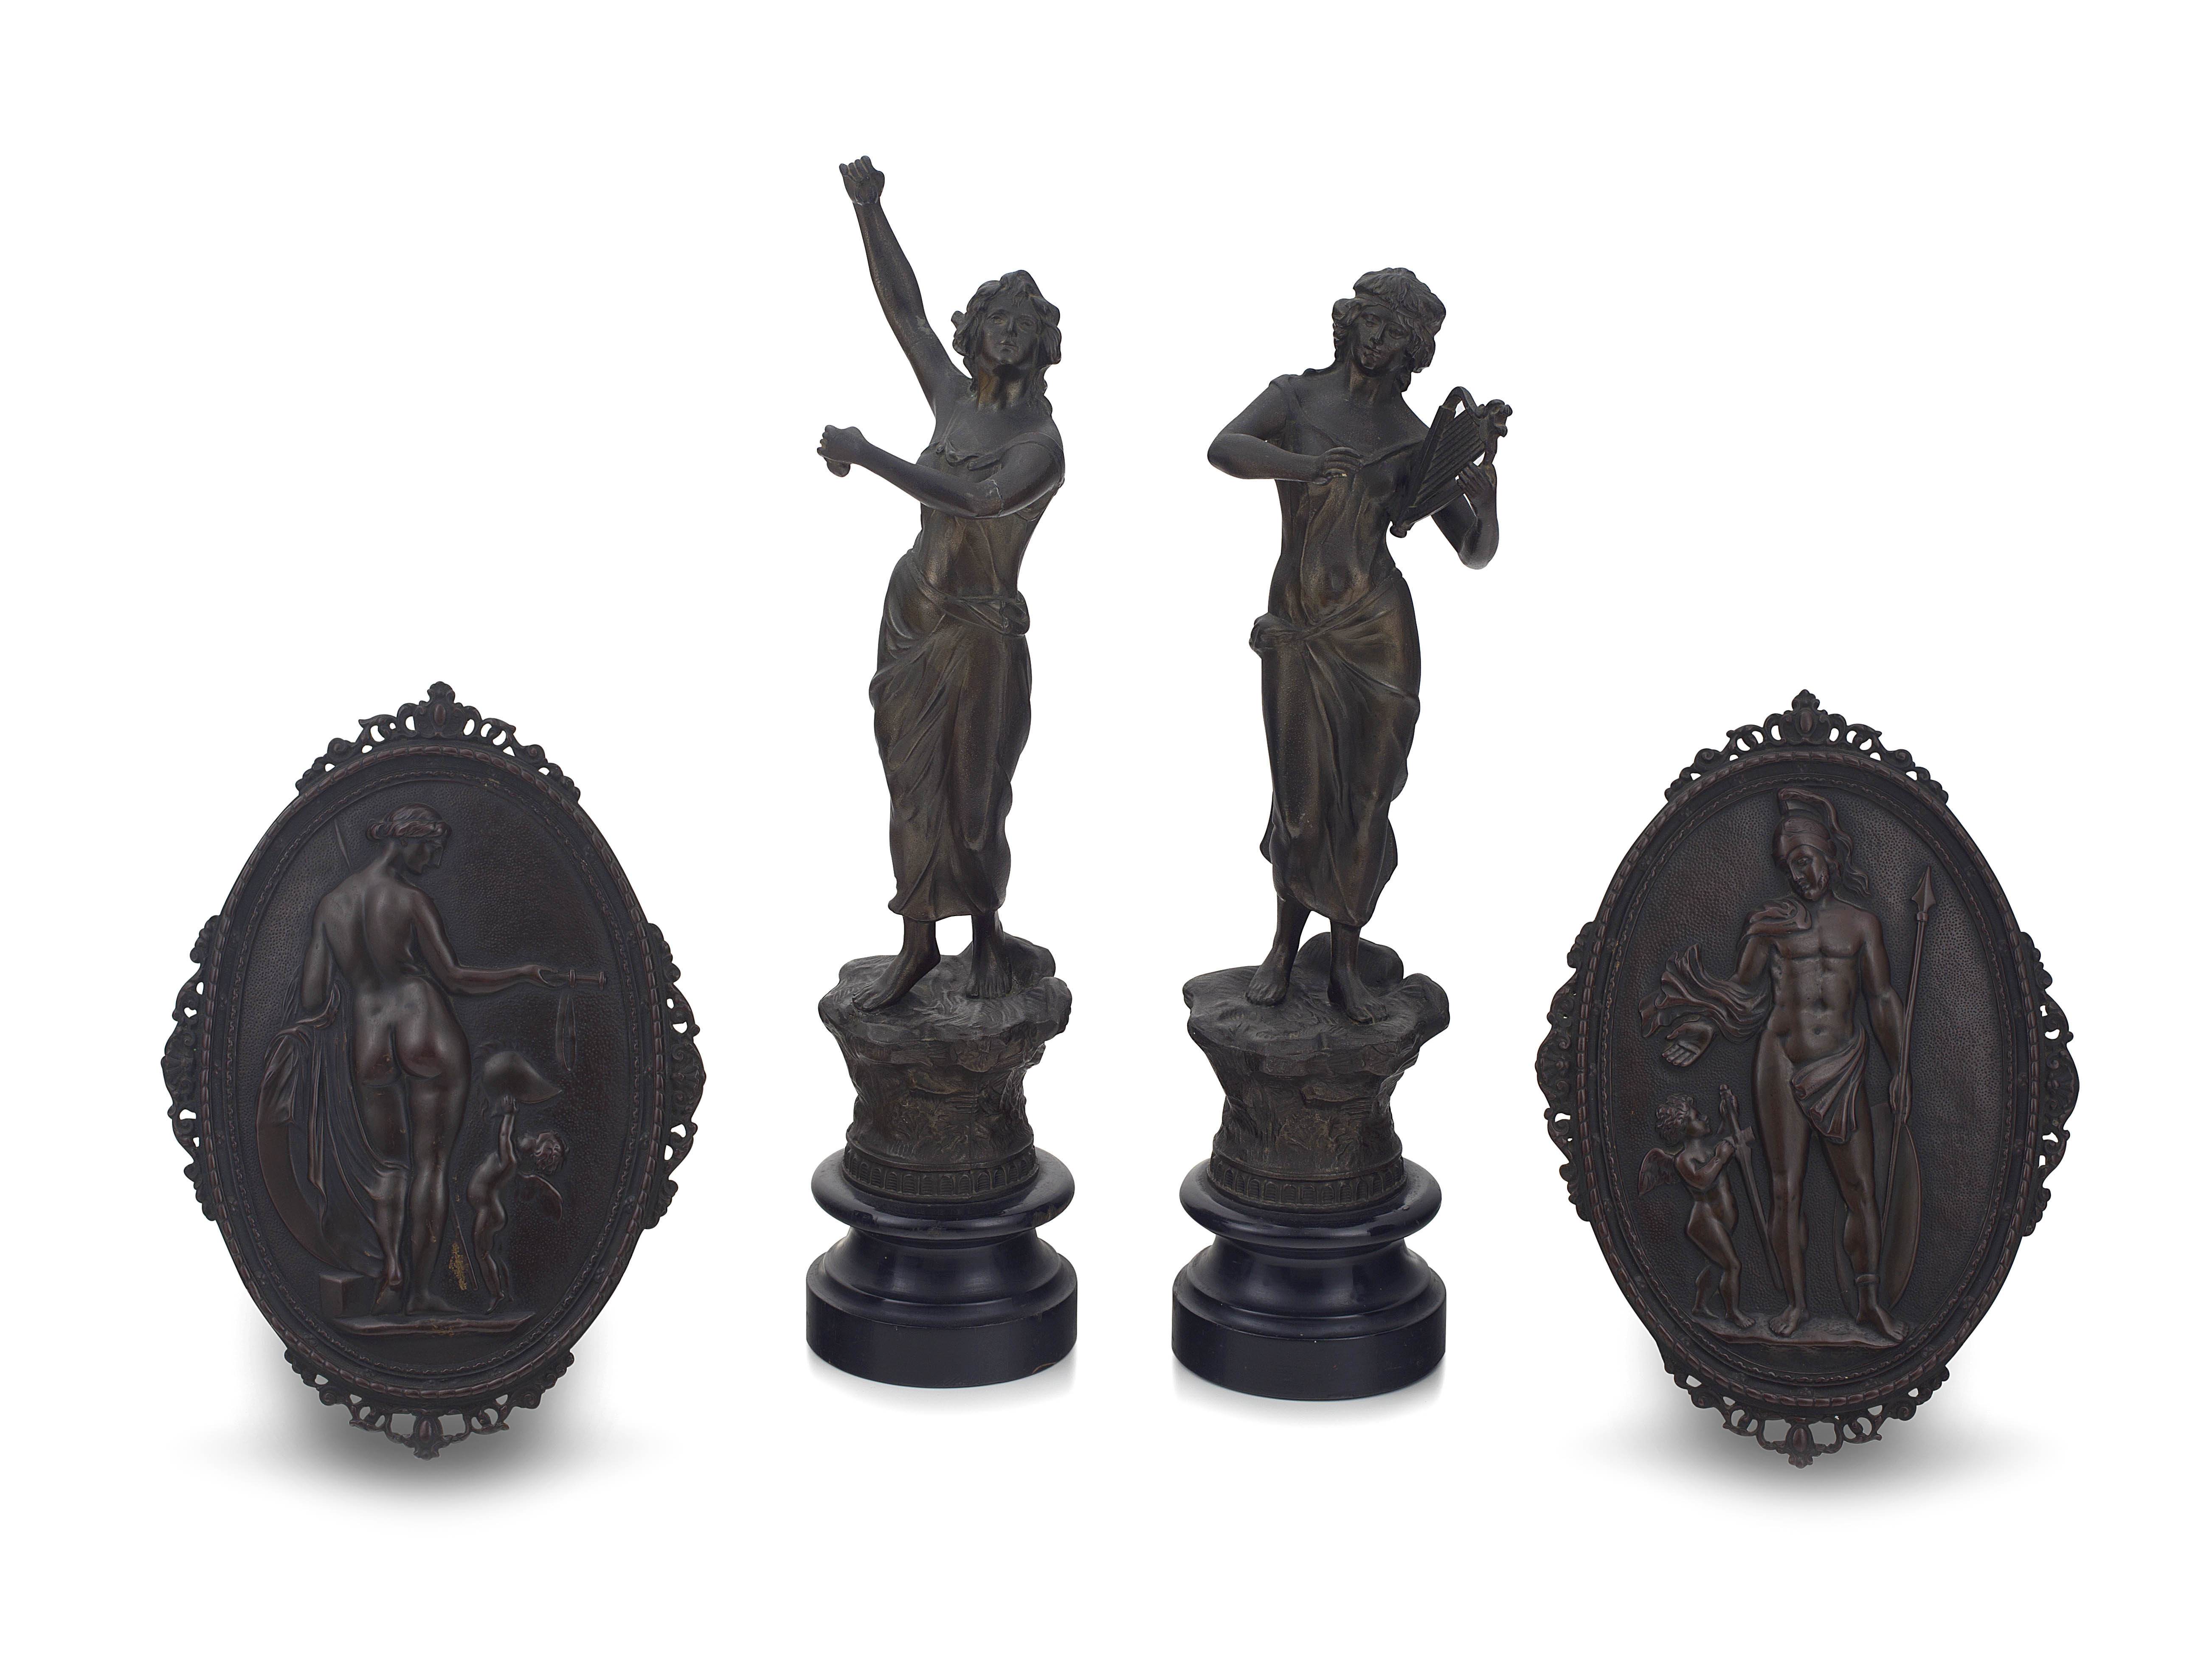 A pair of allegorical patinated bronze wall plaques, 19th/20th century